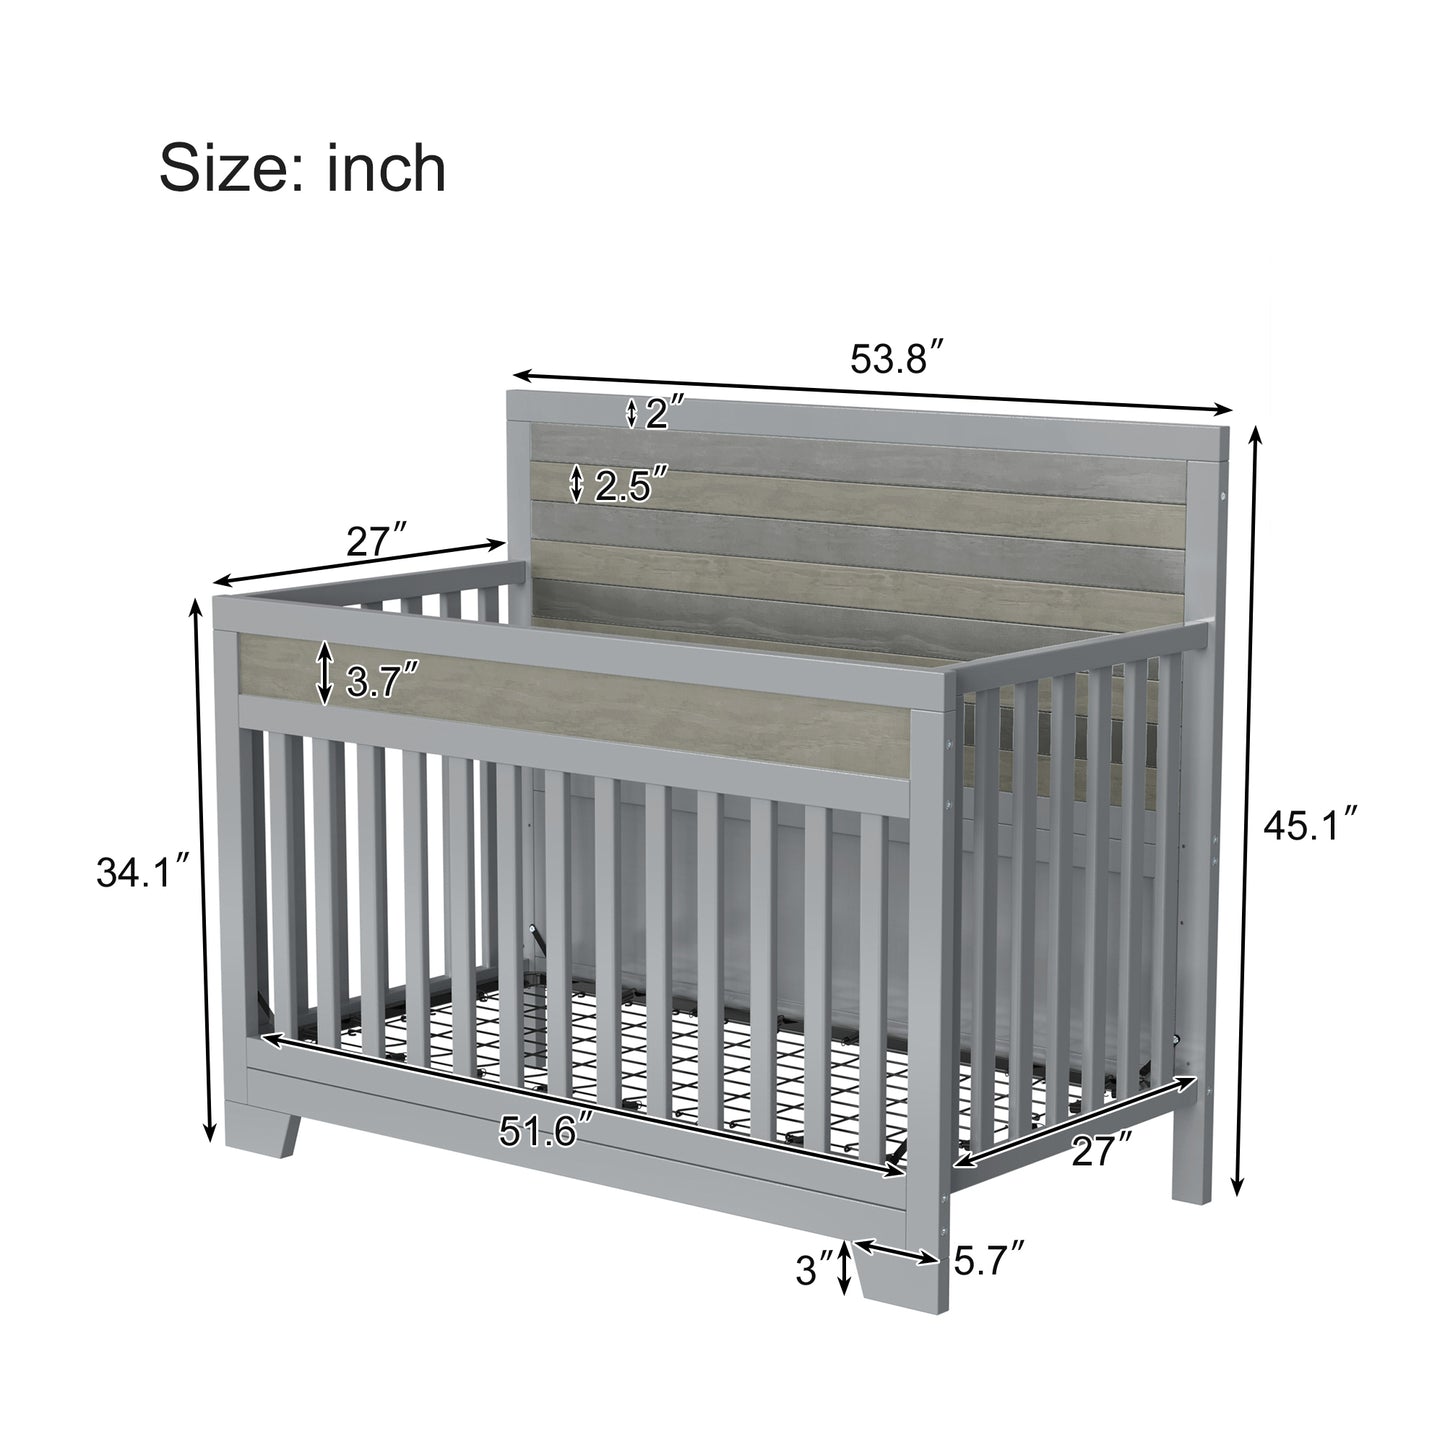 Semiocthome Certified Baby Safe Crib, Pine Solid Wood, Non-Toxic Finish, Gray